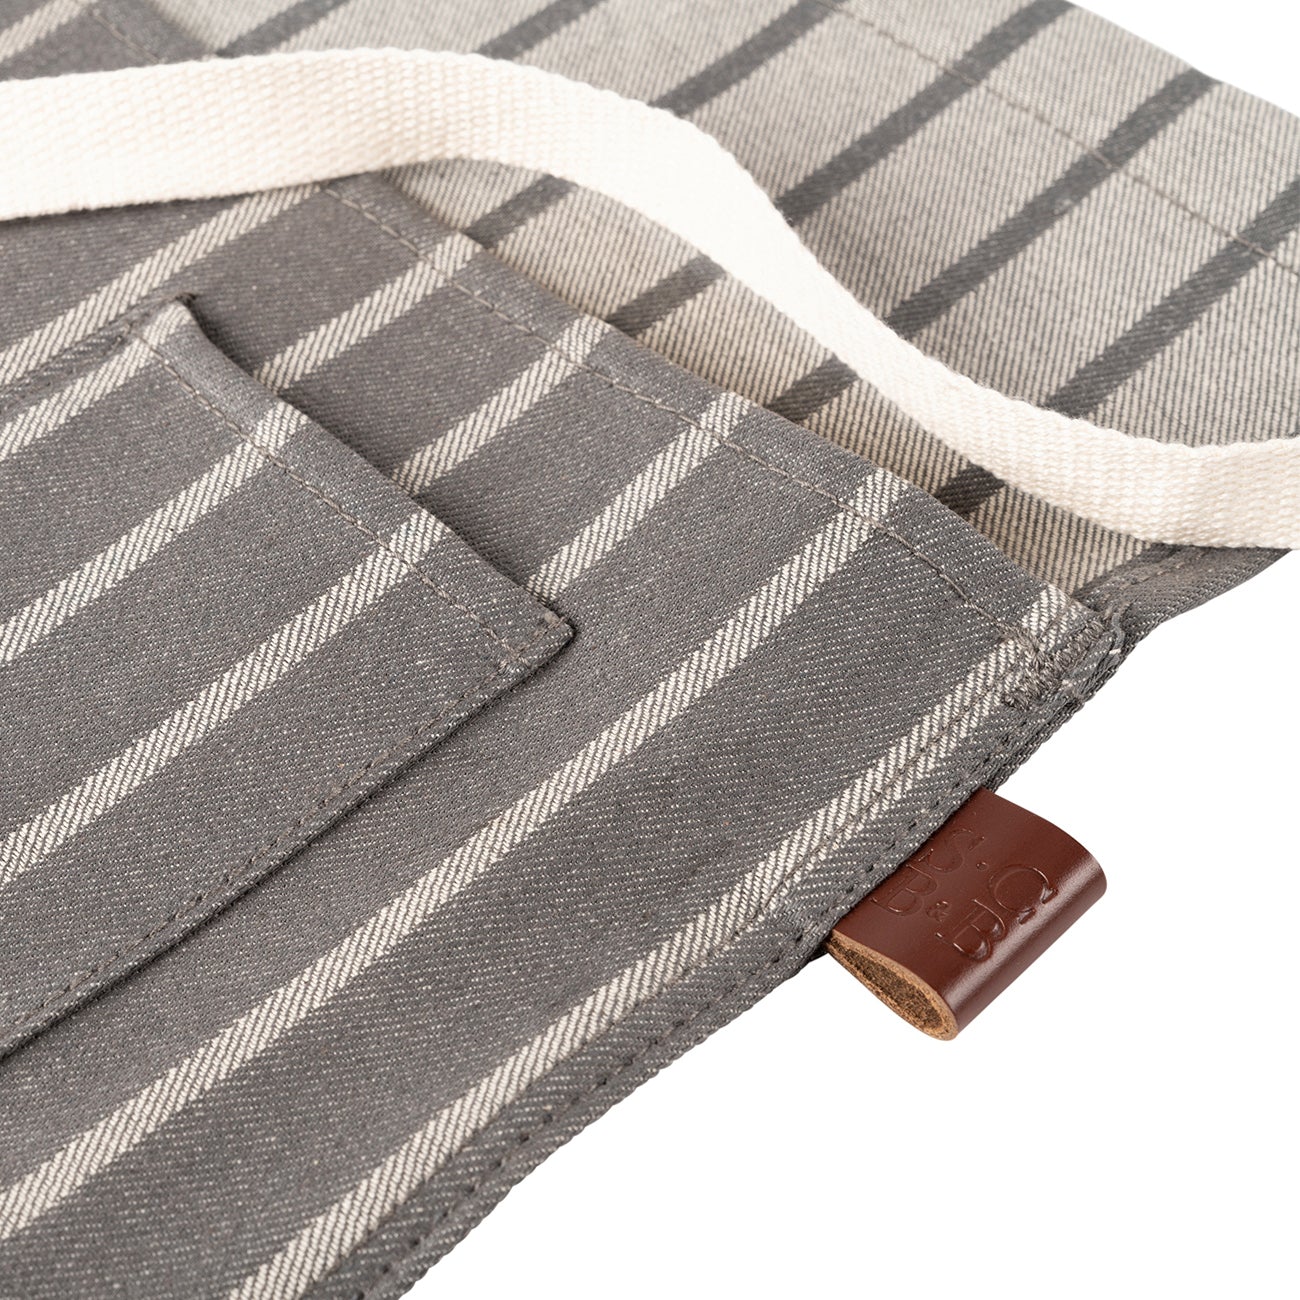 The timeless stripe design of the heavyweight ticking fabric is an enduring favourite, perfectly complementing the clean, understated design of this gardener’s apron.